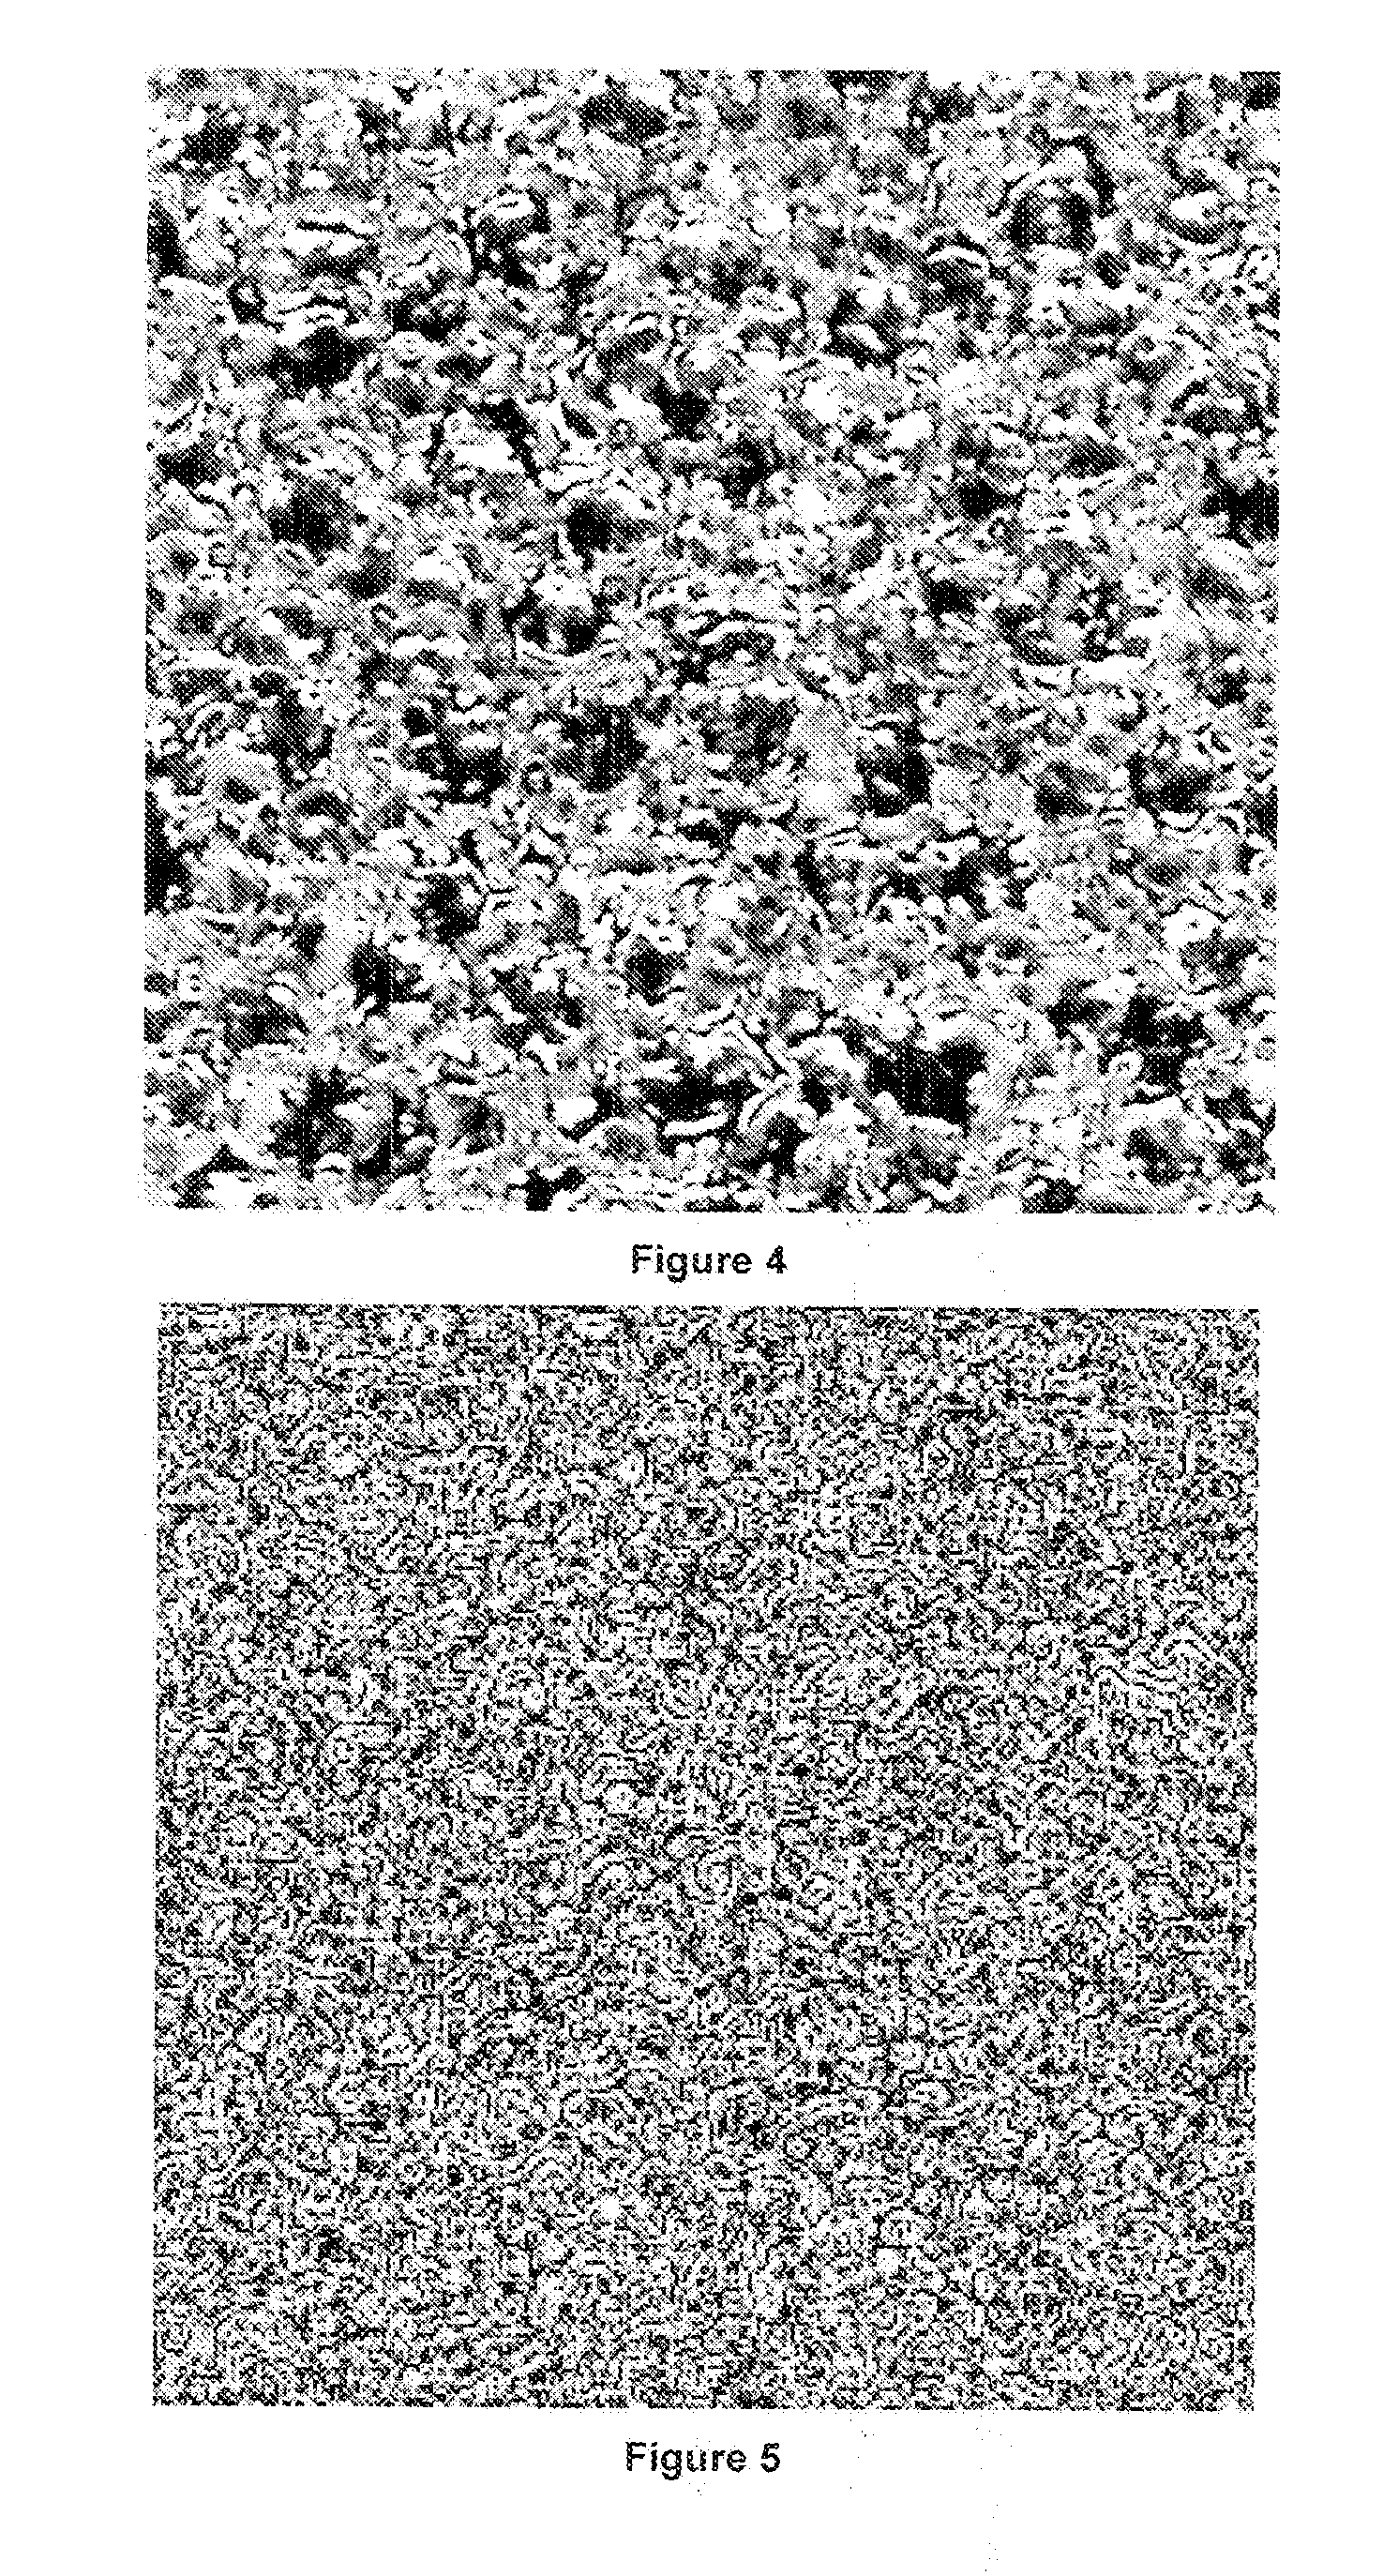 Means for using microstructure of materials surface as a unique identifier